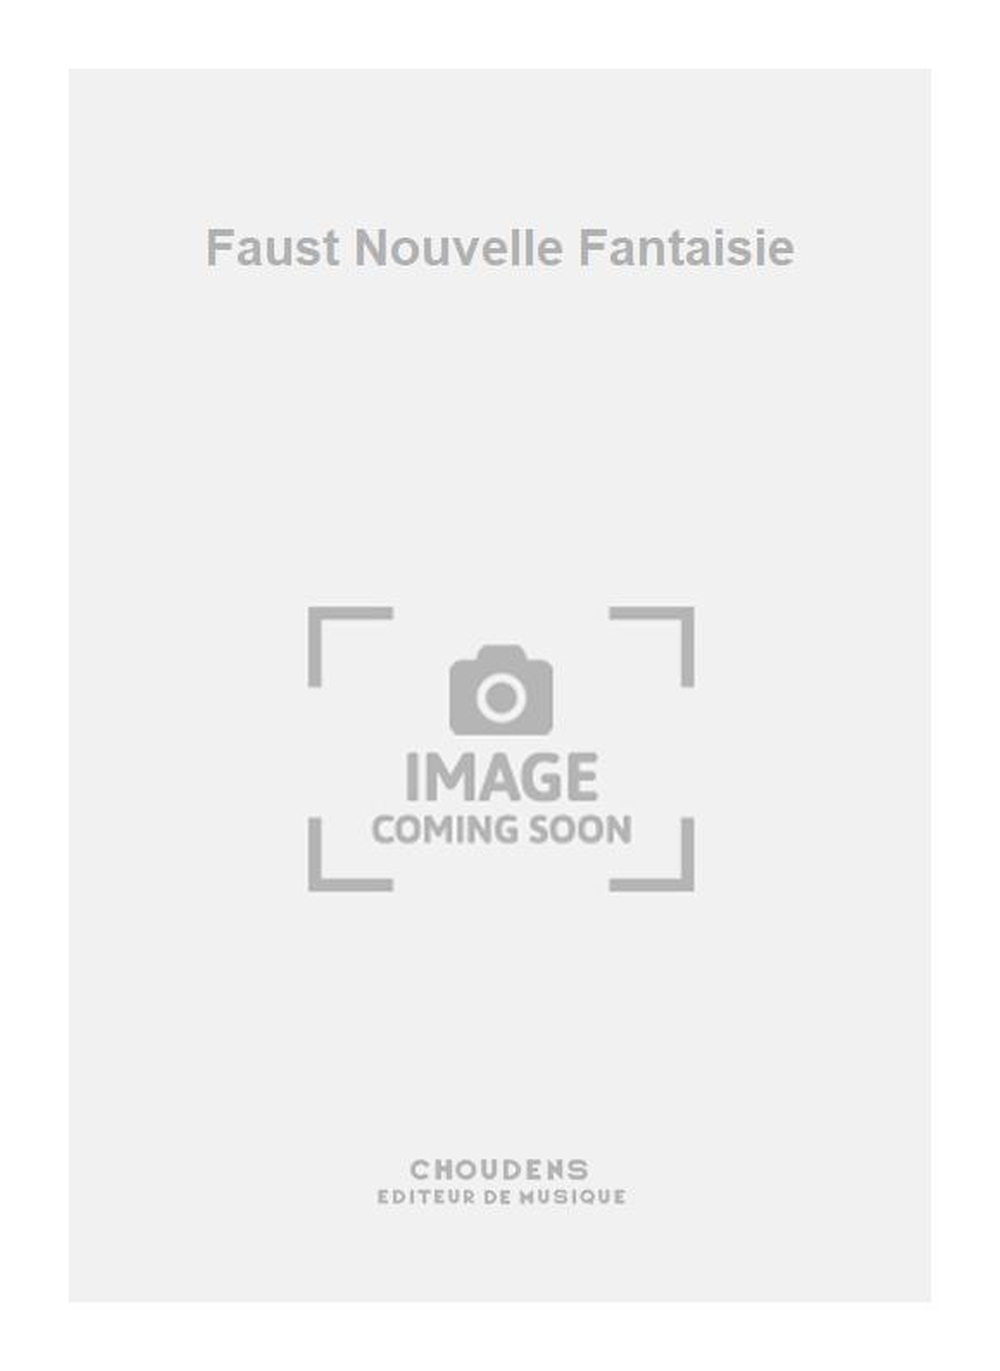 Charles Gounod: Faust Nouvelle Fantaisie